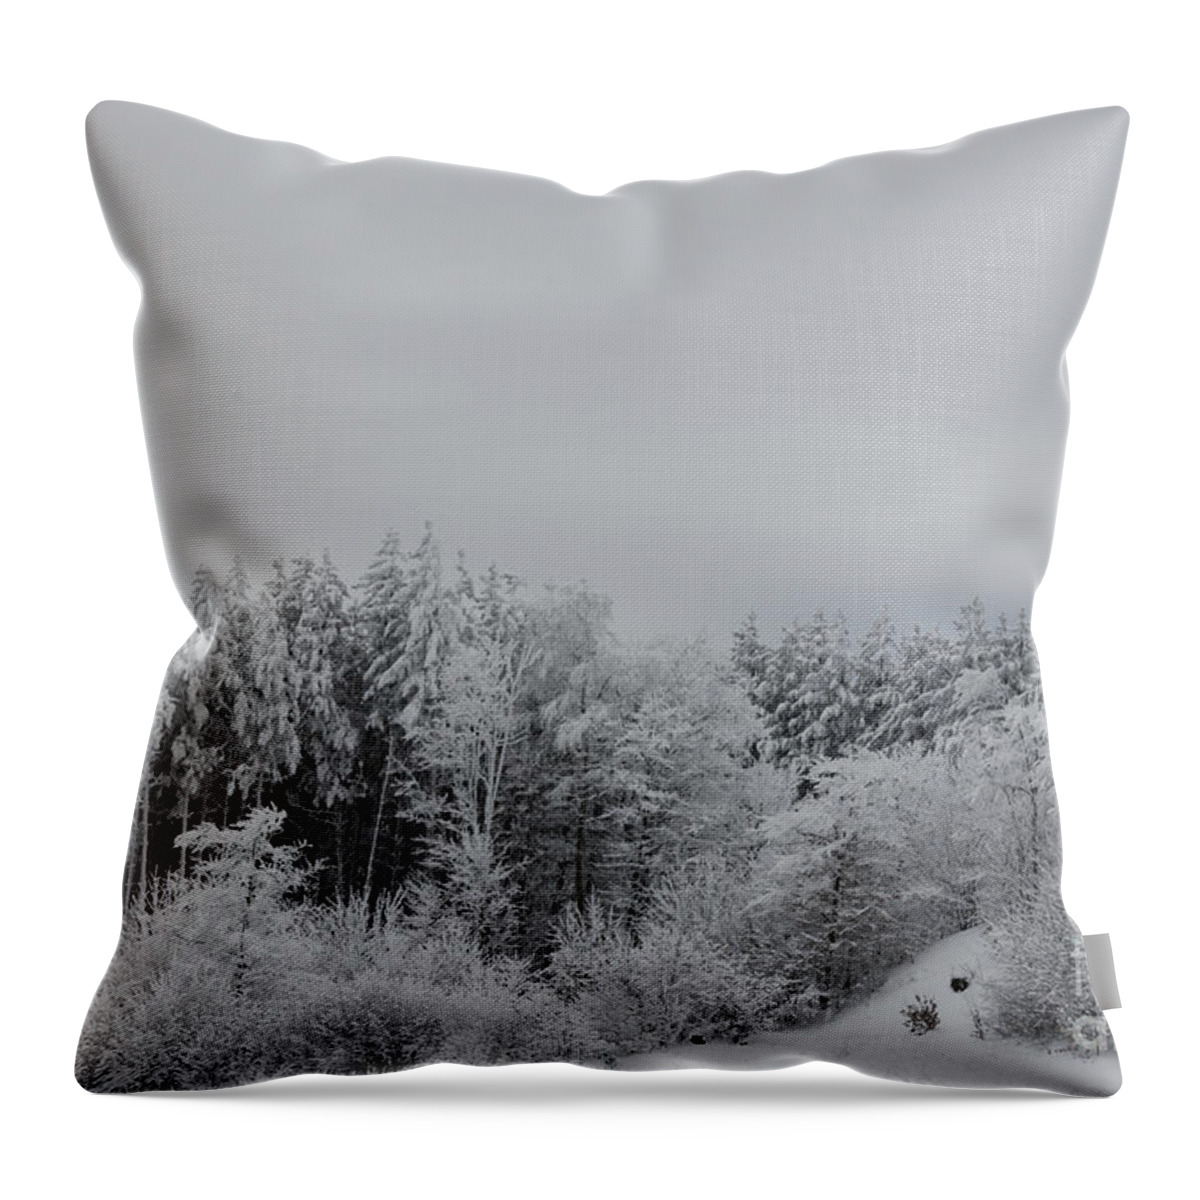 Snow Throw Pillow featuring the photograph Cold Mountain by Randy Bodkins